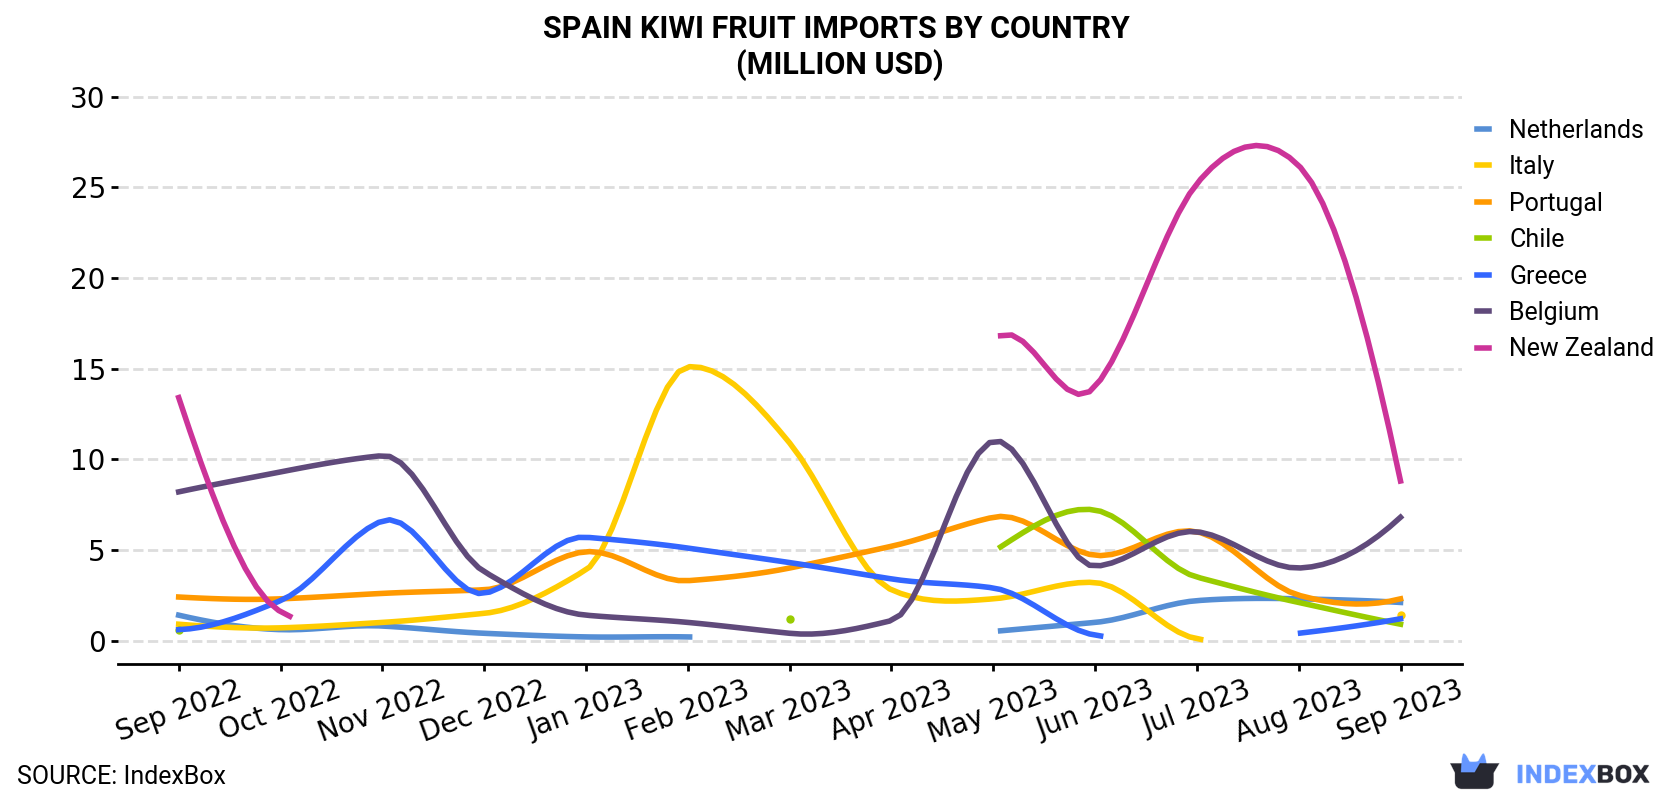 Spain Kiwi Fruit Imports By Country (Million USD)